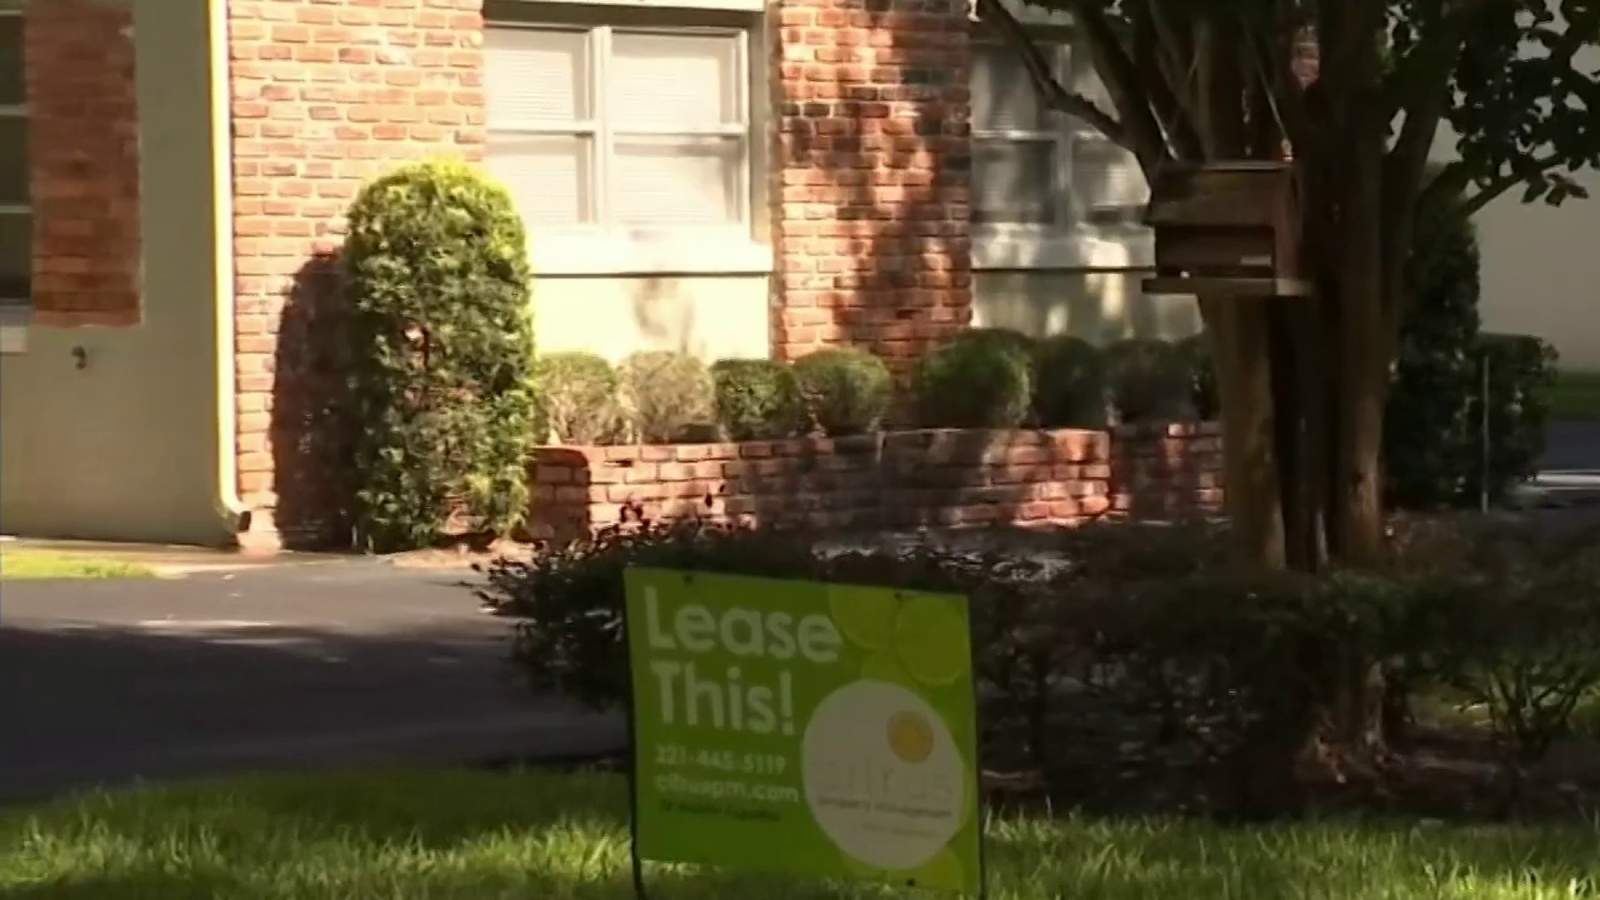 Groups warn of surge in evictions after Gov. DeSantis extends foreclosure ban to August